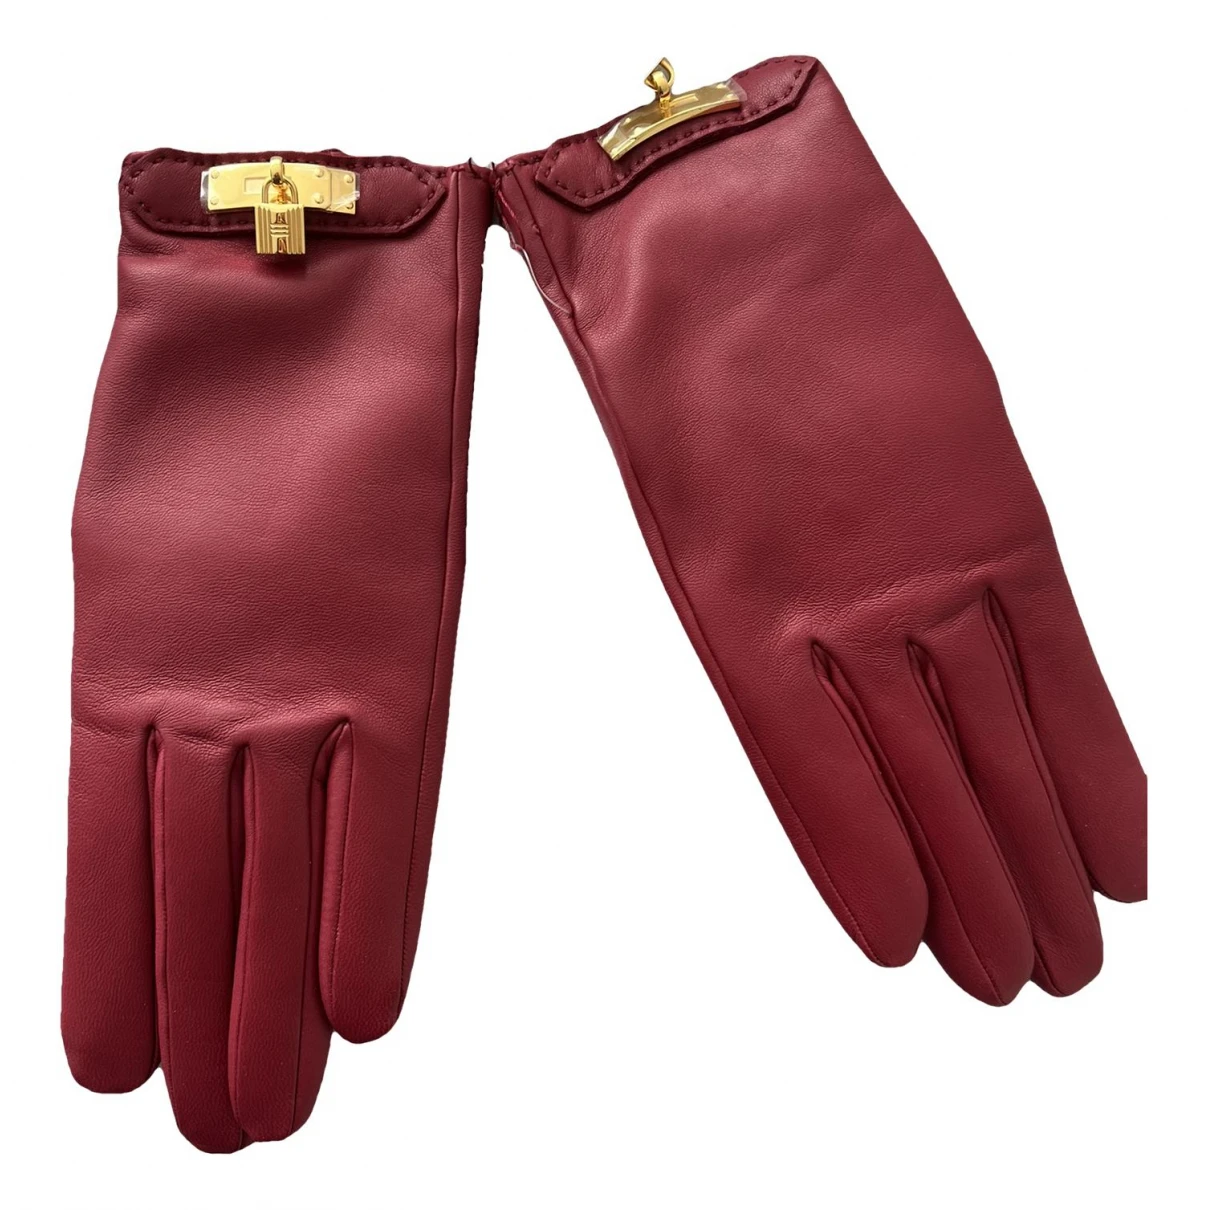 accessories Hermès gloves Soya for Female Leather S International. Used condition